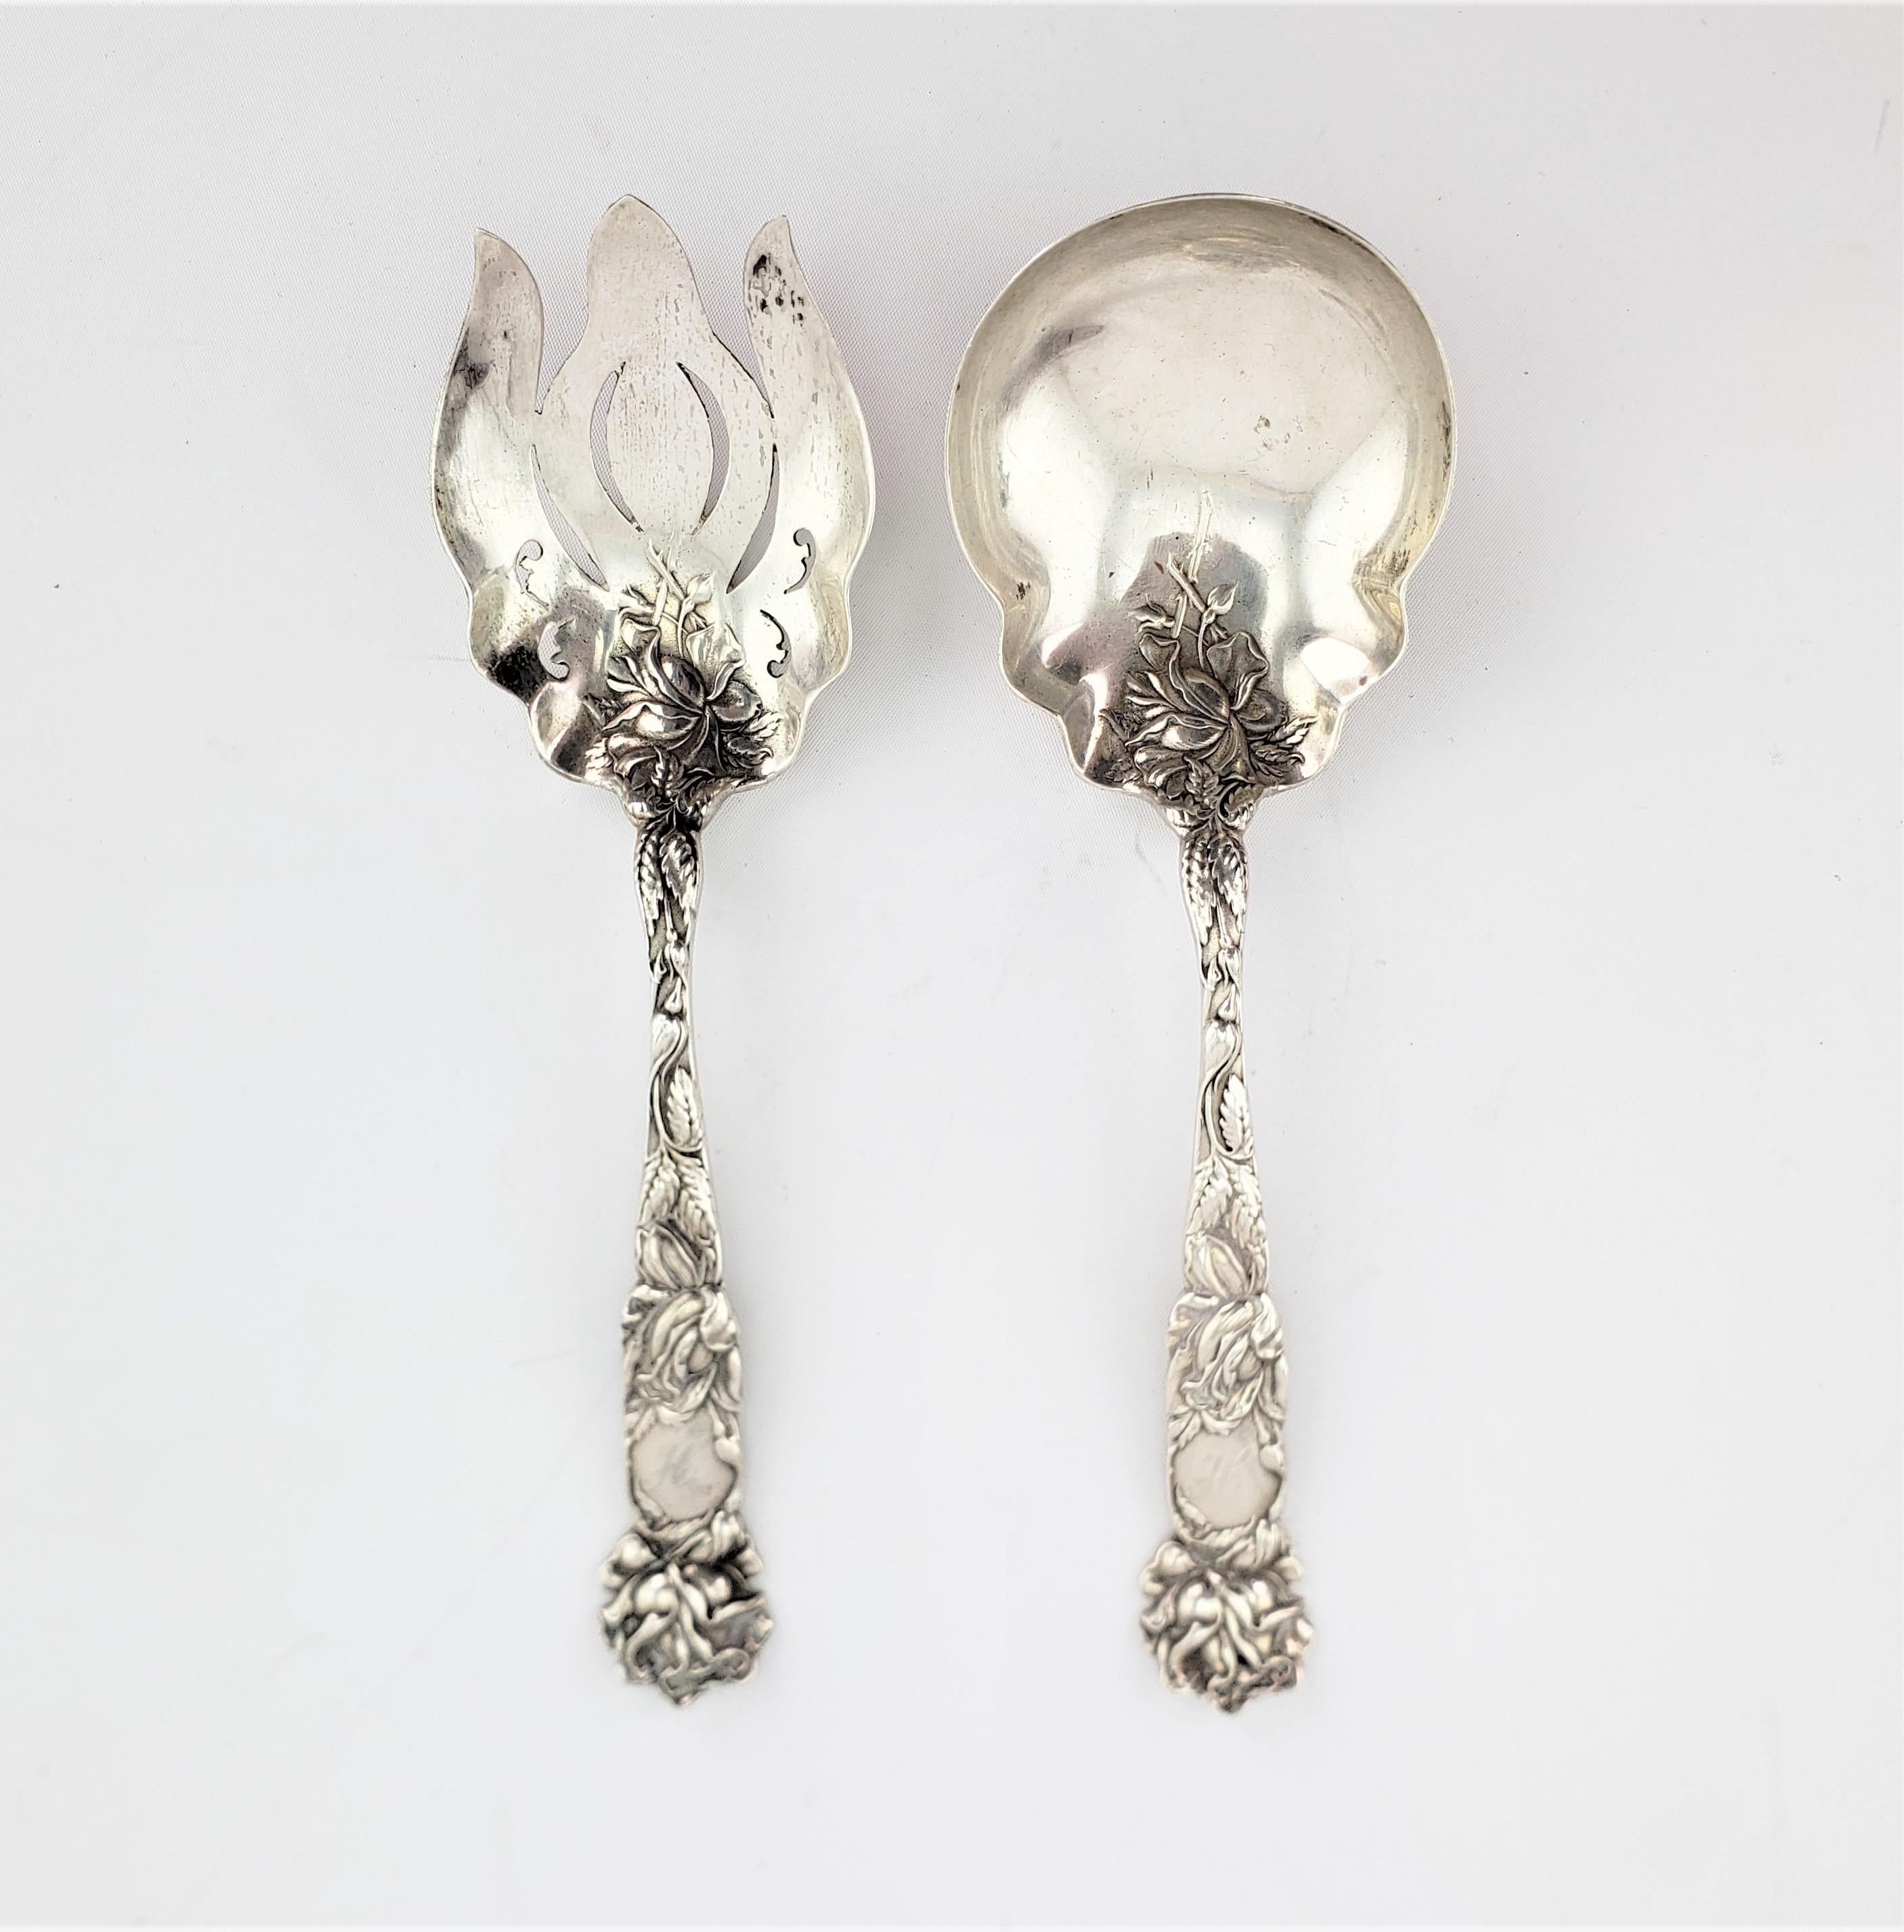 This set of antique sterling silver serving spoons are unsigned, but presumed to have been made in the United States in approximately 1890 in the period Art Nouveau style. The handles are decorated with flowers and leaves done in high relief which